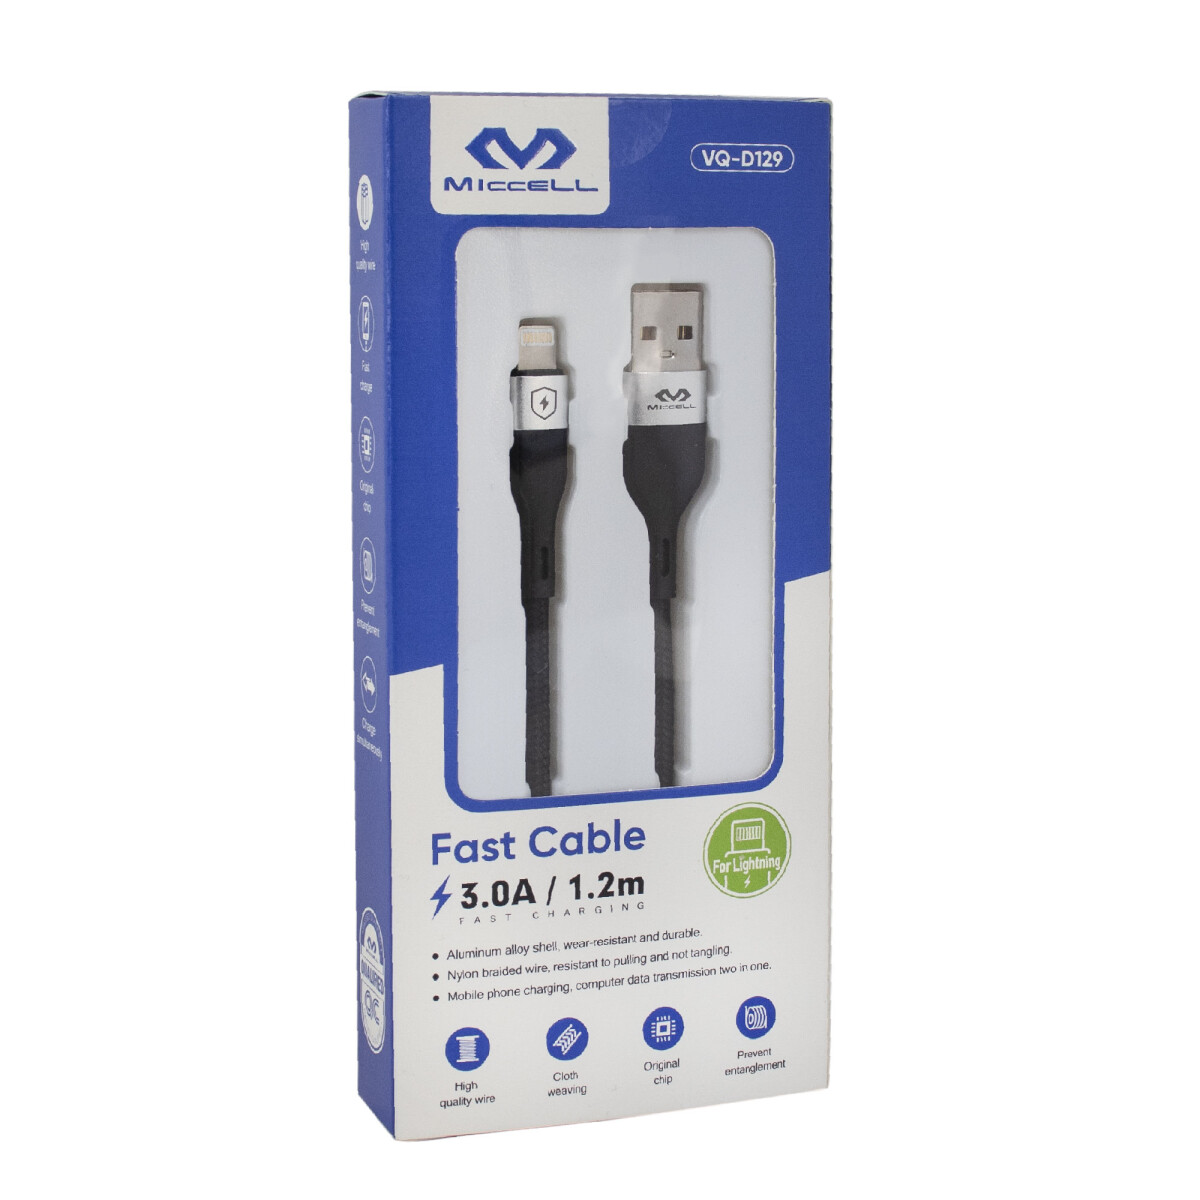 Cable Para iPhone Miccell 3a 1.2m Plateado 